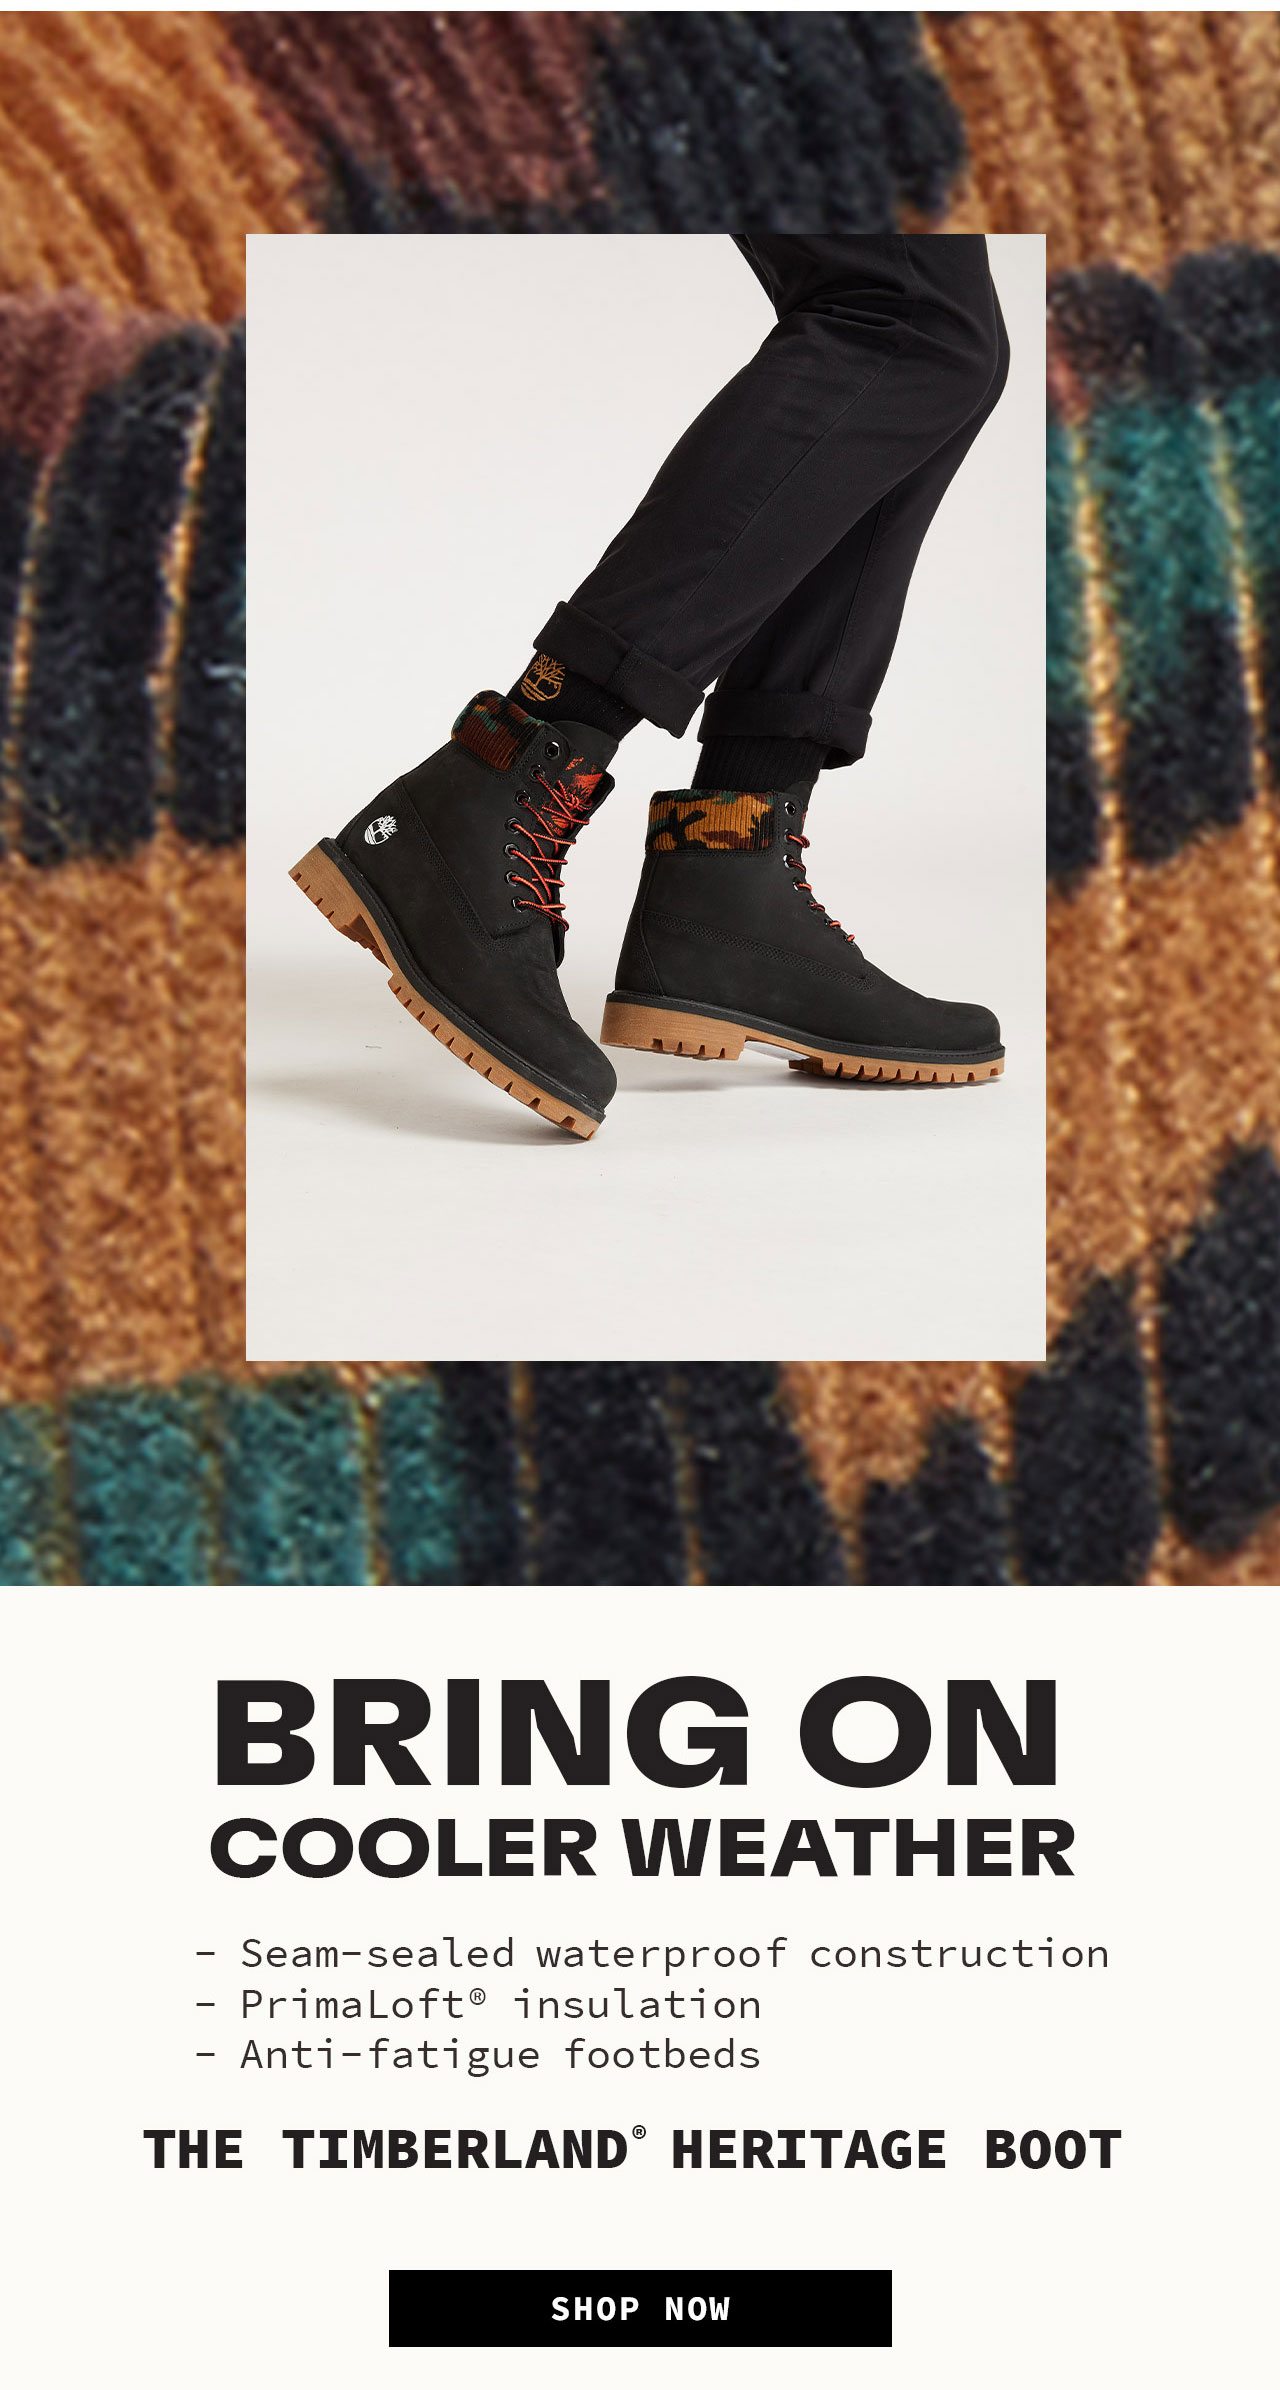 Bring on Cooler Weather. The Timberland Heritage Boot. SHOP NOW